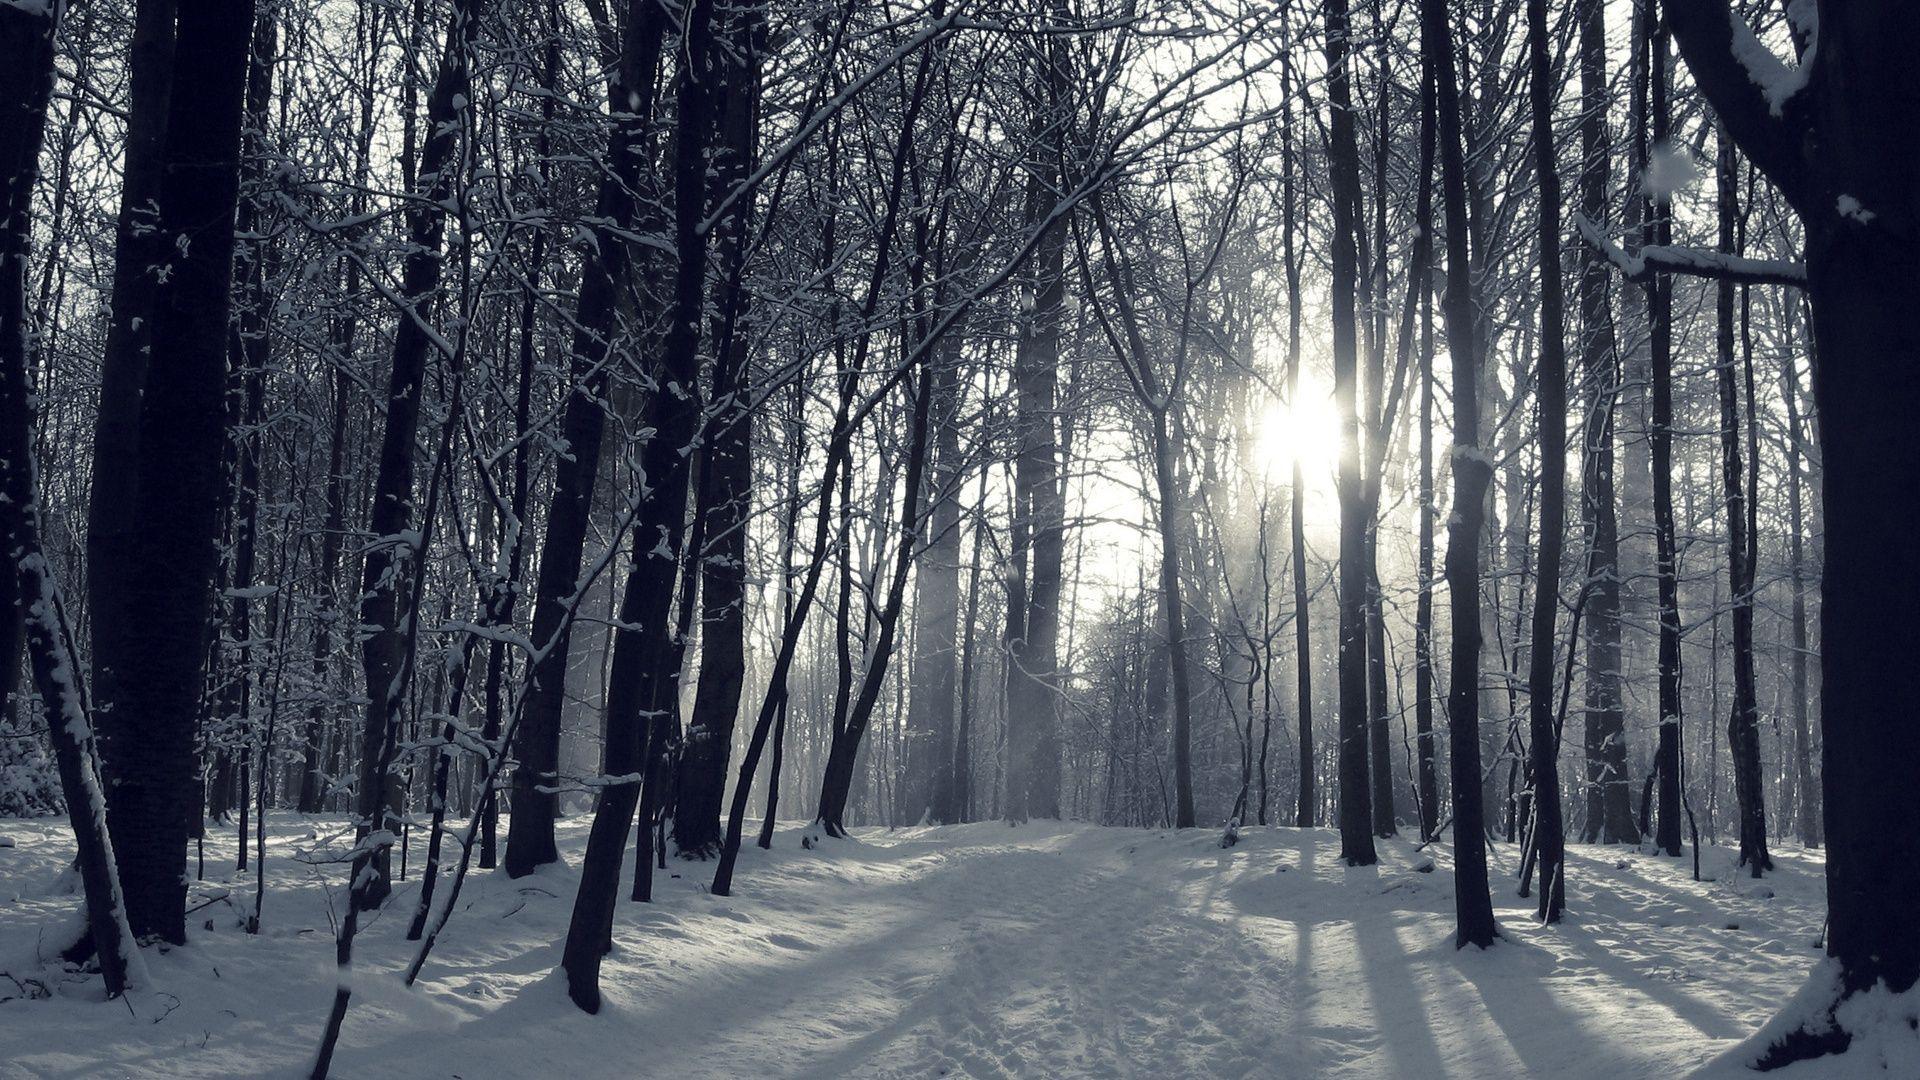 Snowy Forest Wallpaper. Nature. Snowy forest